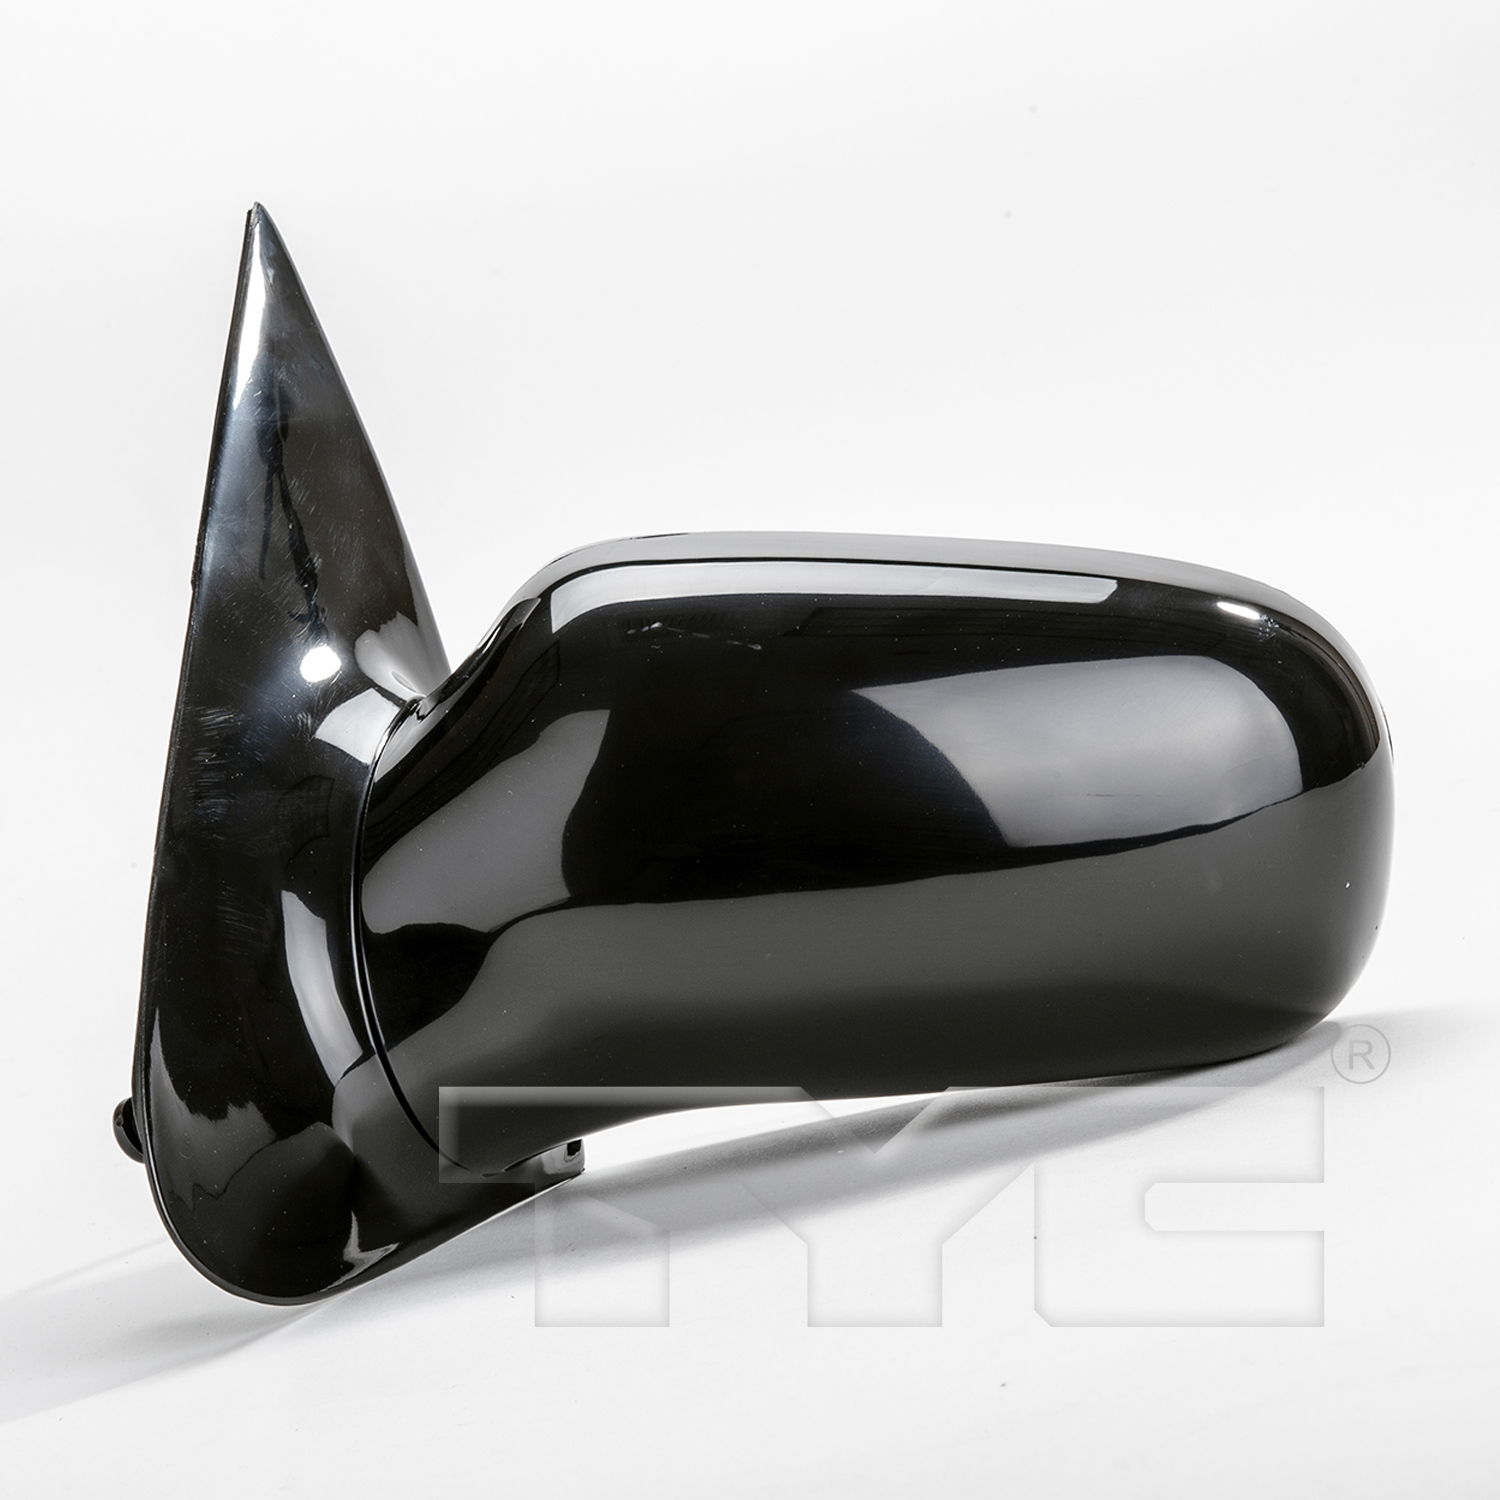 Aftermarket MIRRORS for PONTIAC - SUNFIRE, SUNFIRE,95-00,LT Mirror outside rear view